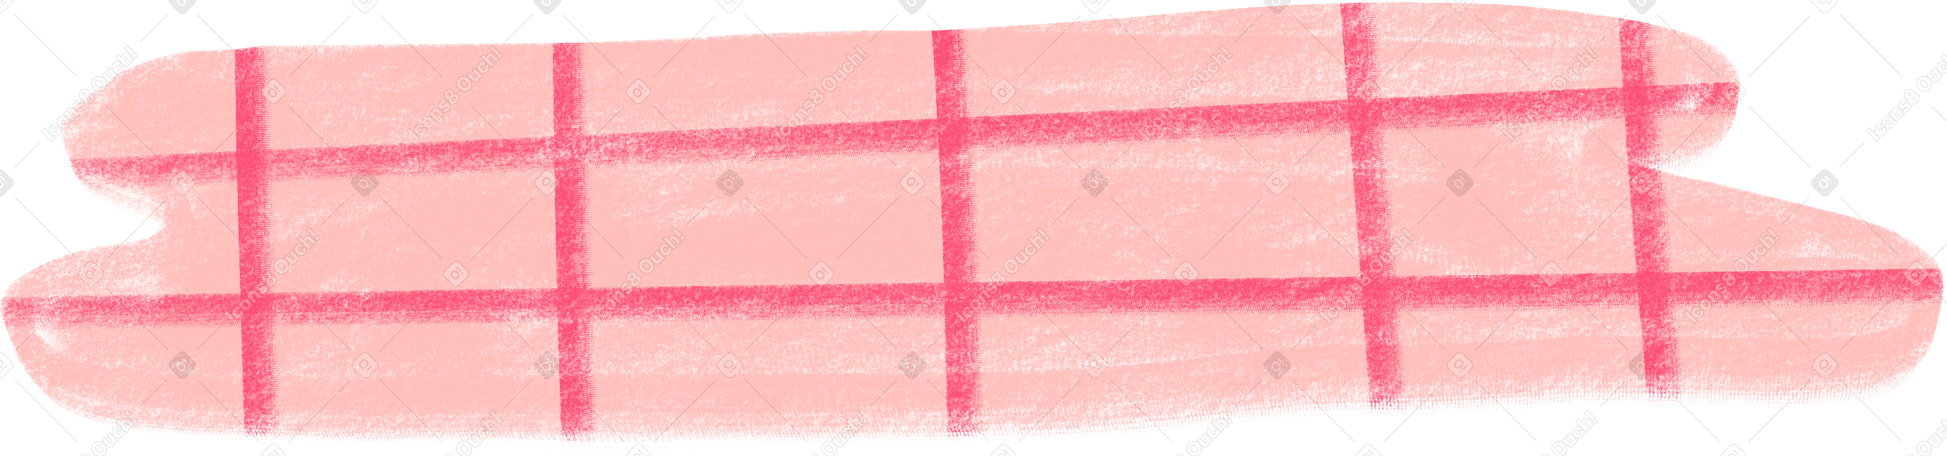 horizontal pink shape with plaid pattern Illustration in PNG, SVG